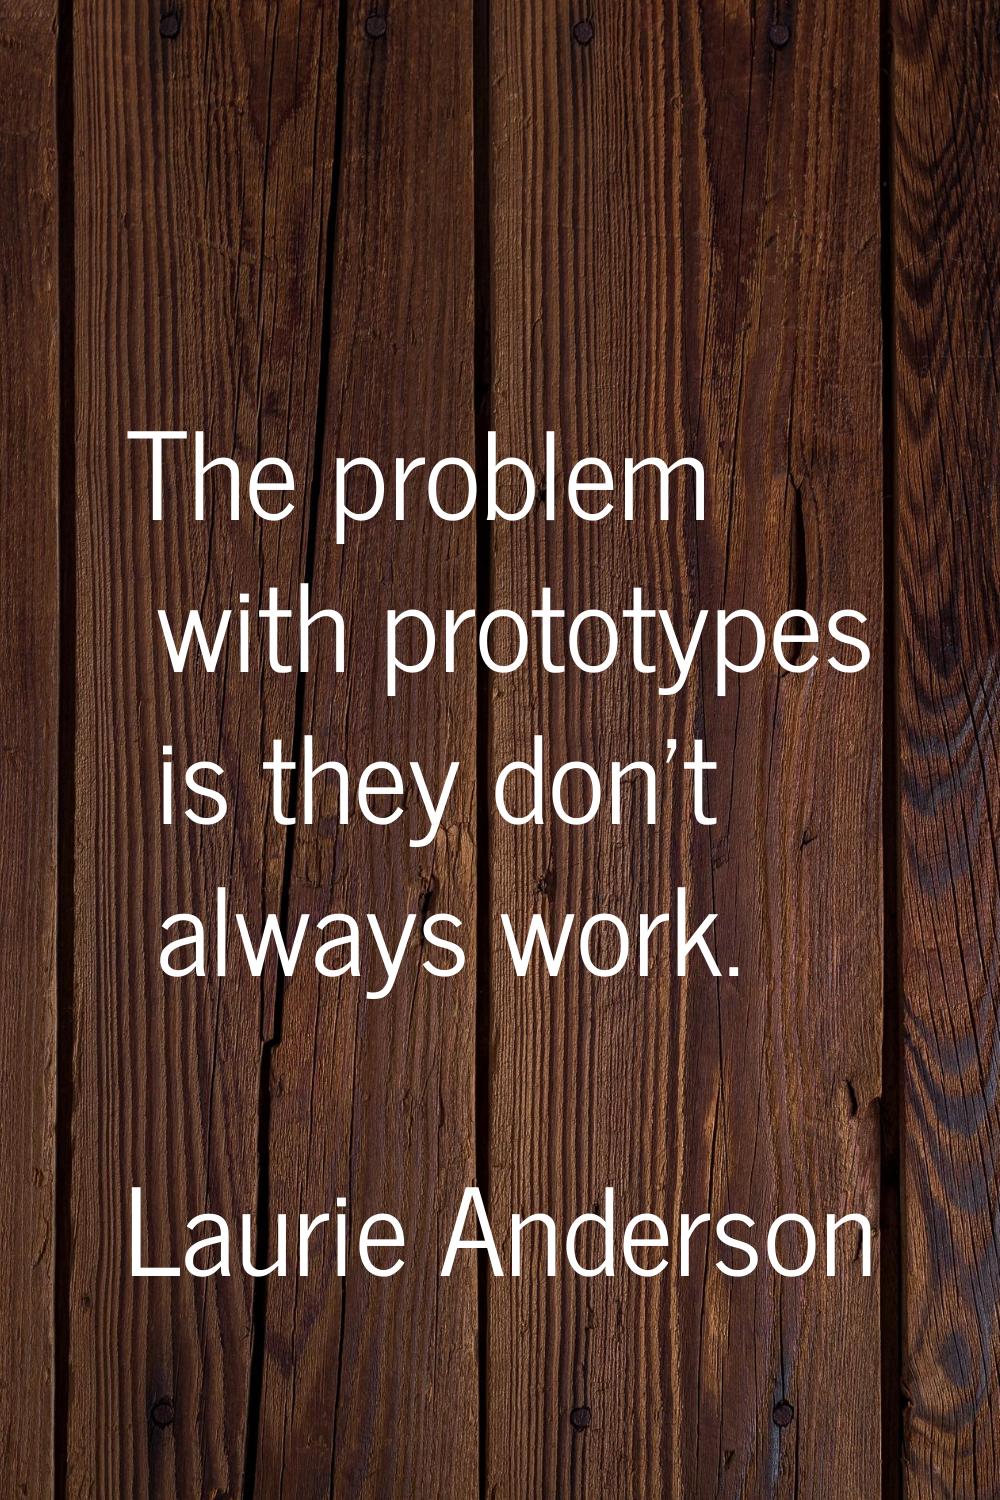 The problem with prototypes is they don't always work.